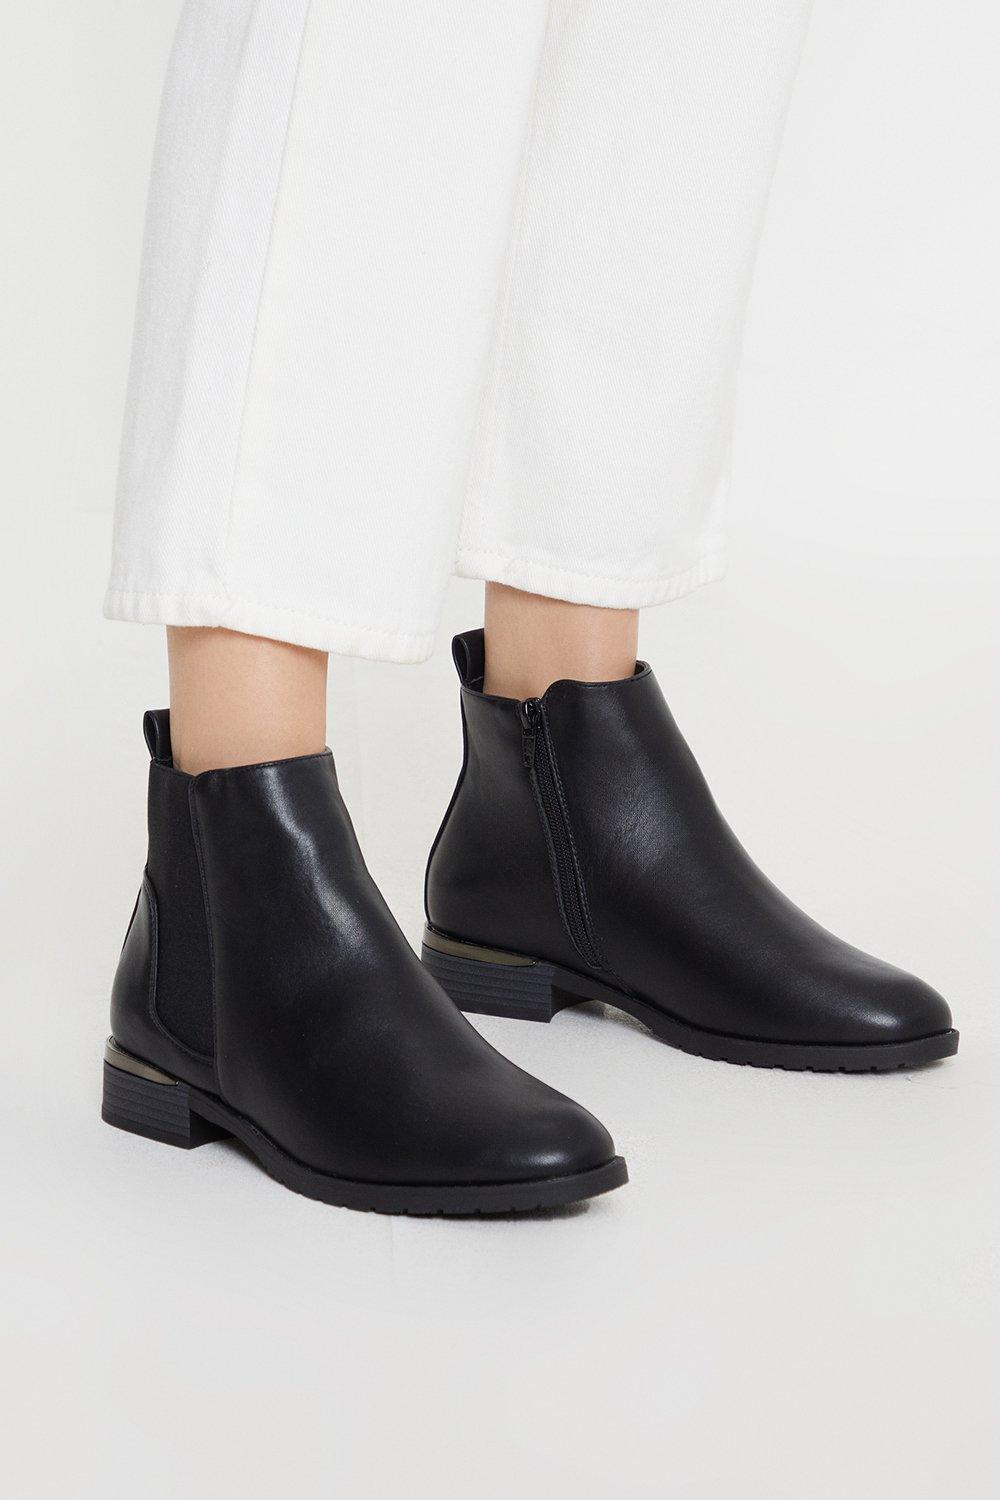 Womens Good For The Sole: Molly Wide Fit Comfort Chelsea Boots